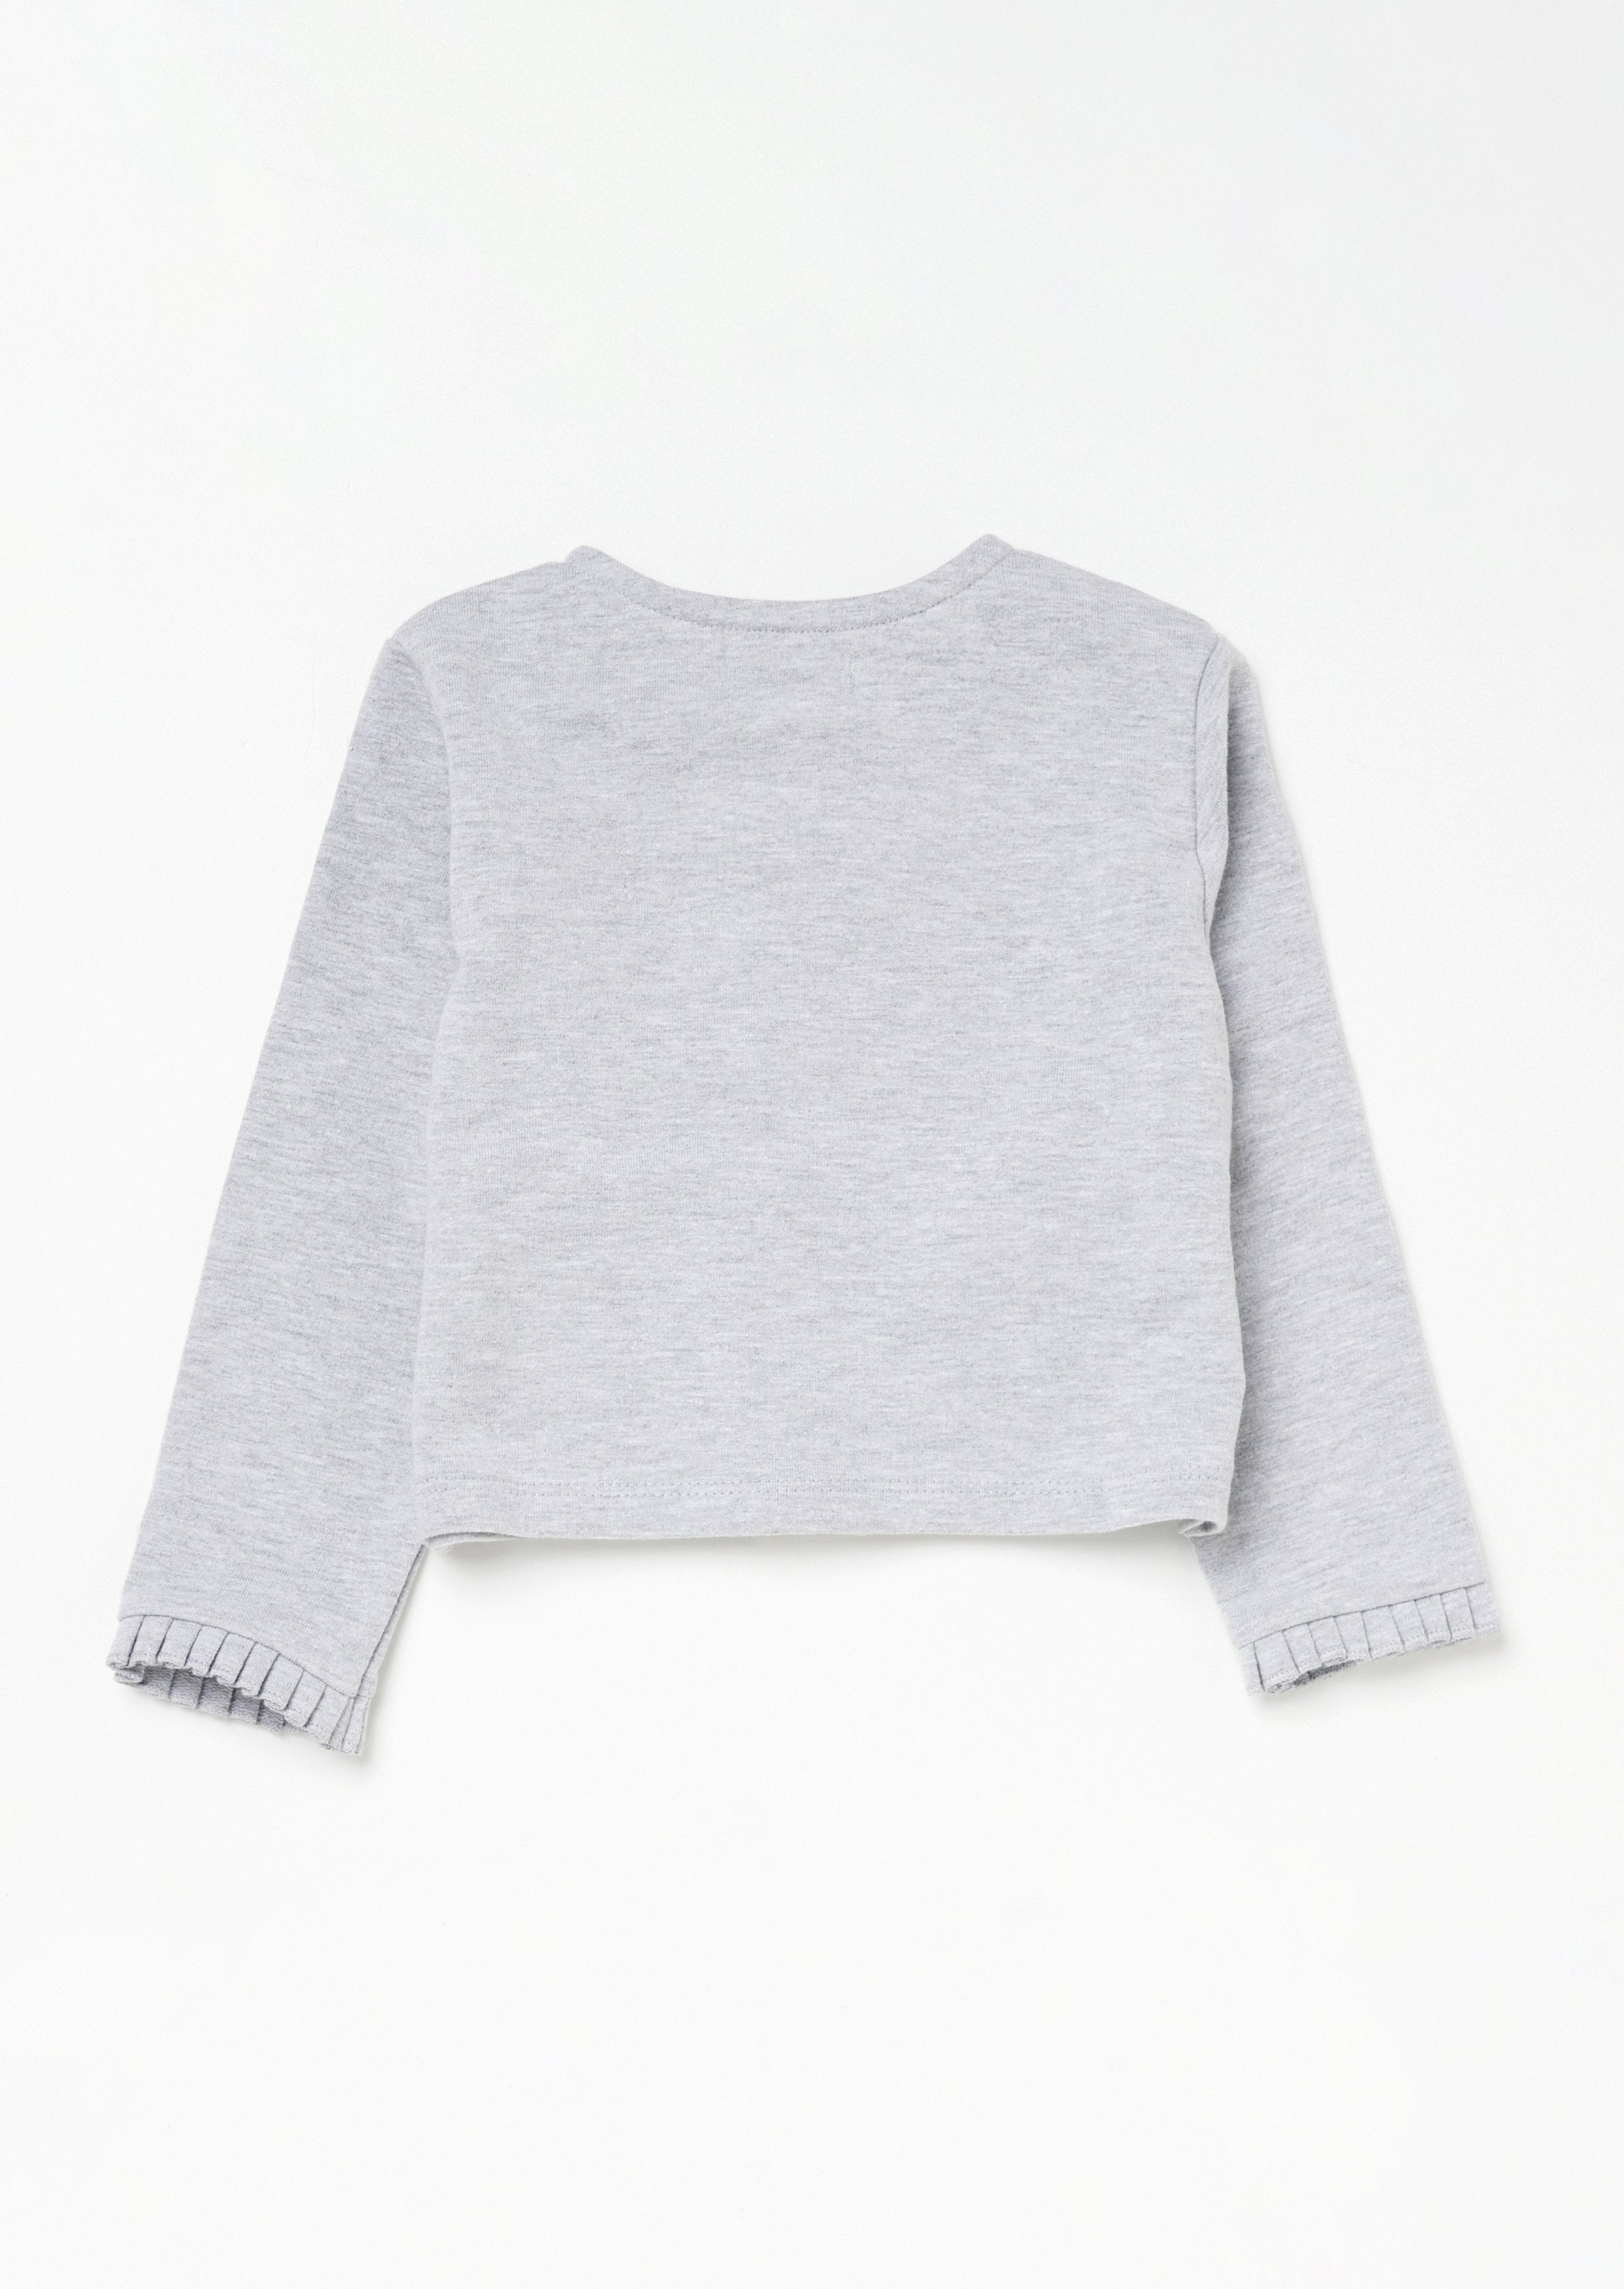 Baby Girl Solid Grey Sweater with Pocket